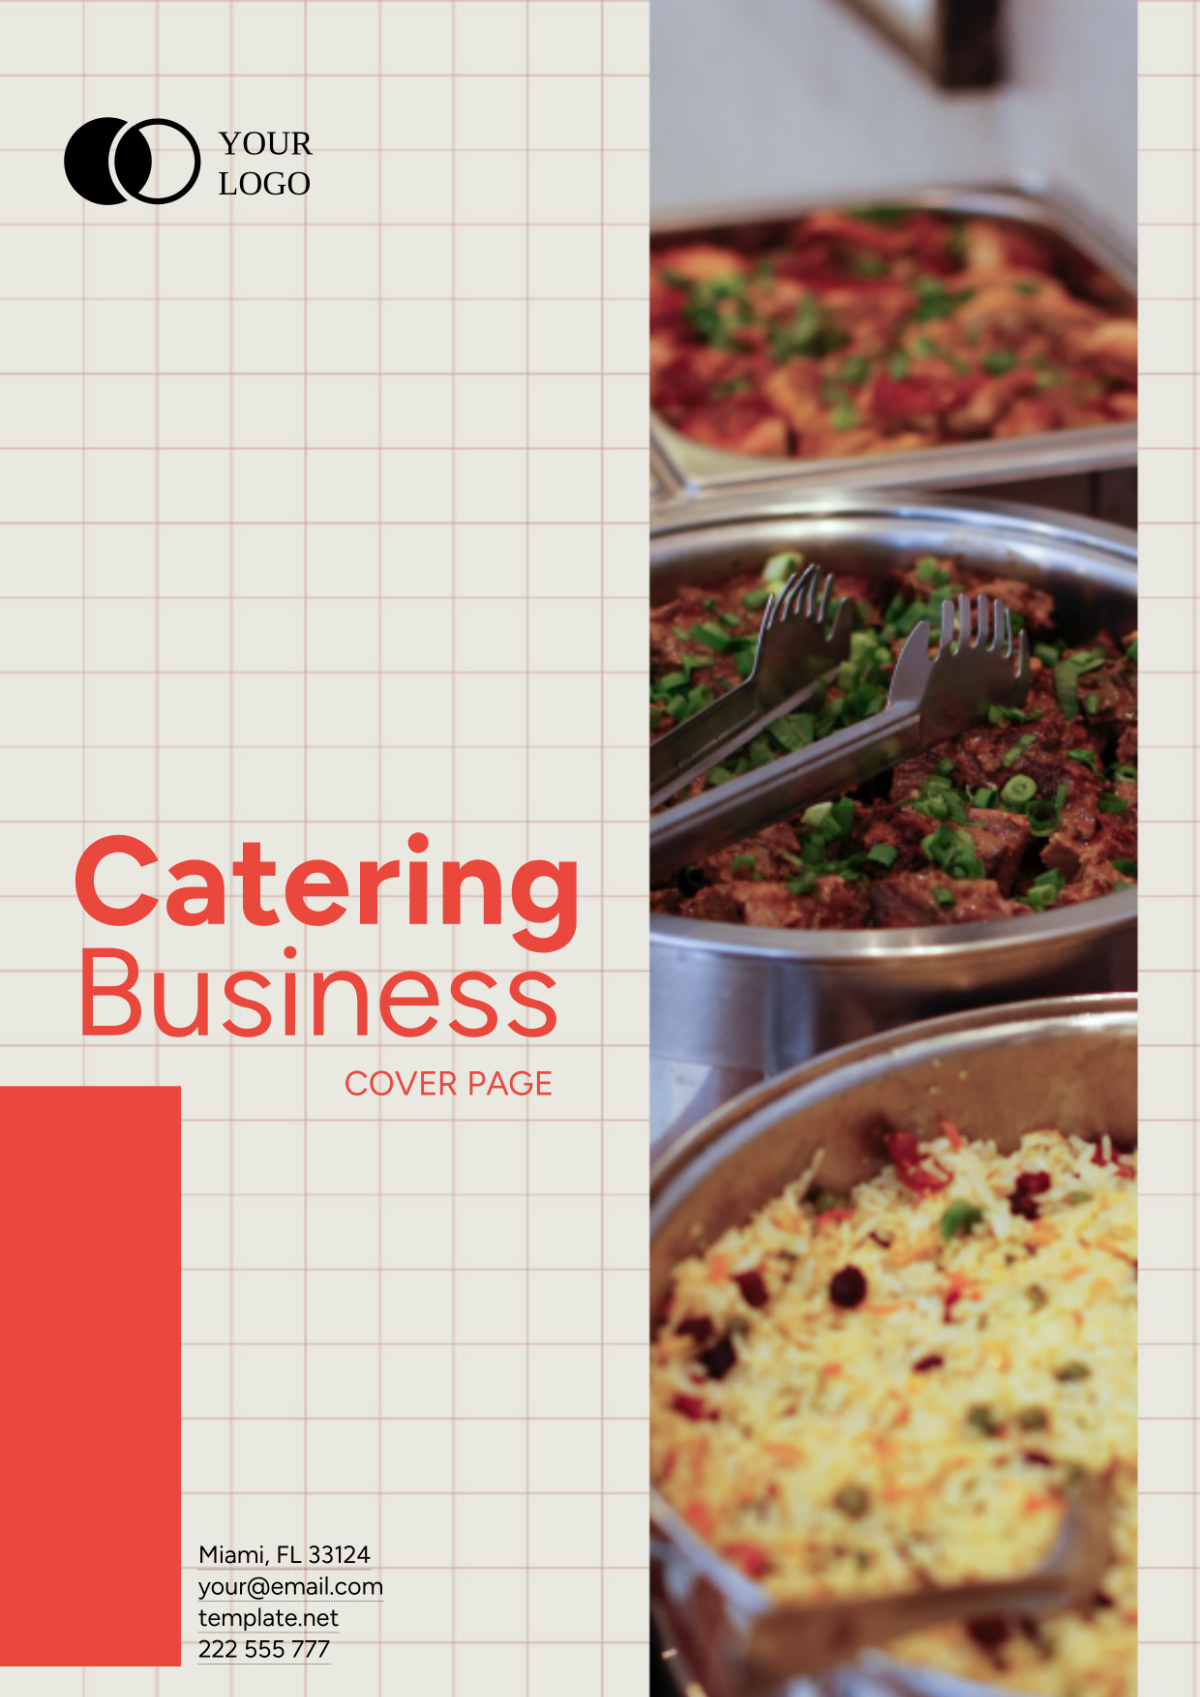 Catering Business Cover Page Template